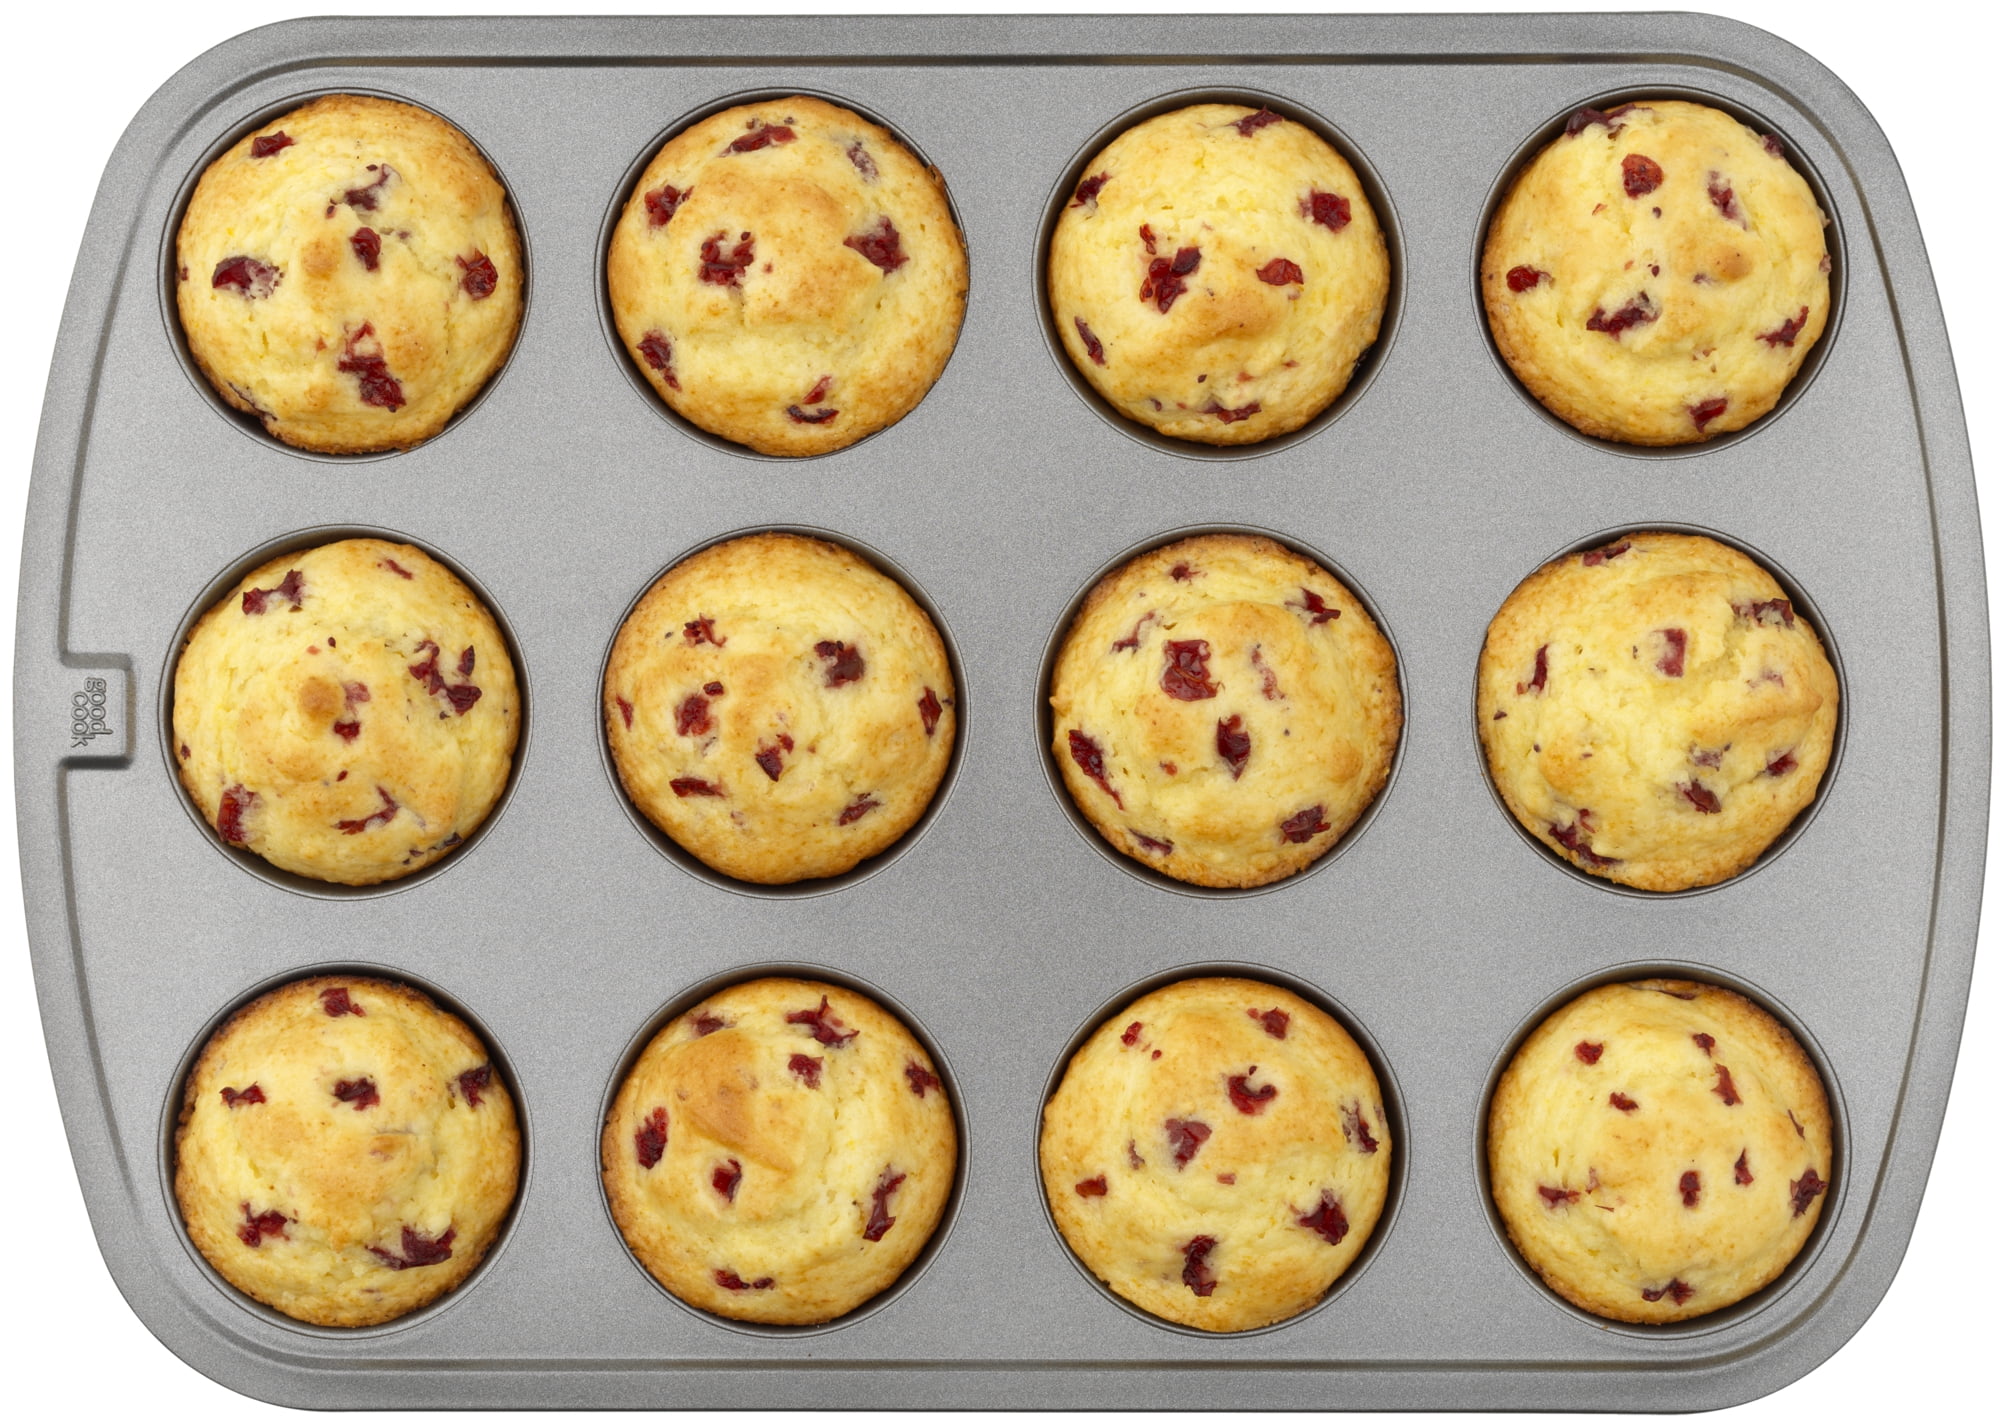 Goodcook 12-Cup Non-Stick Muffin Pan - Foley Hardware